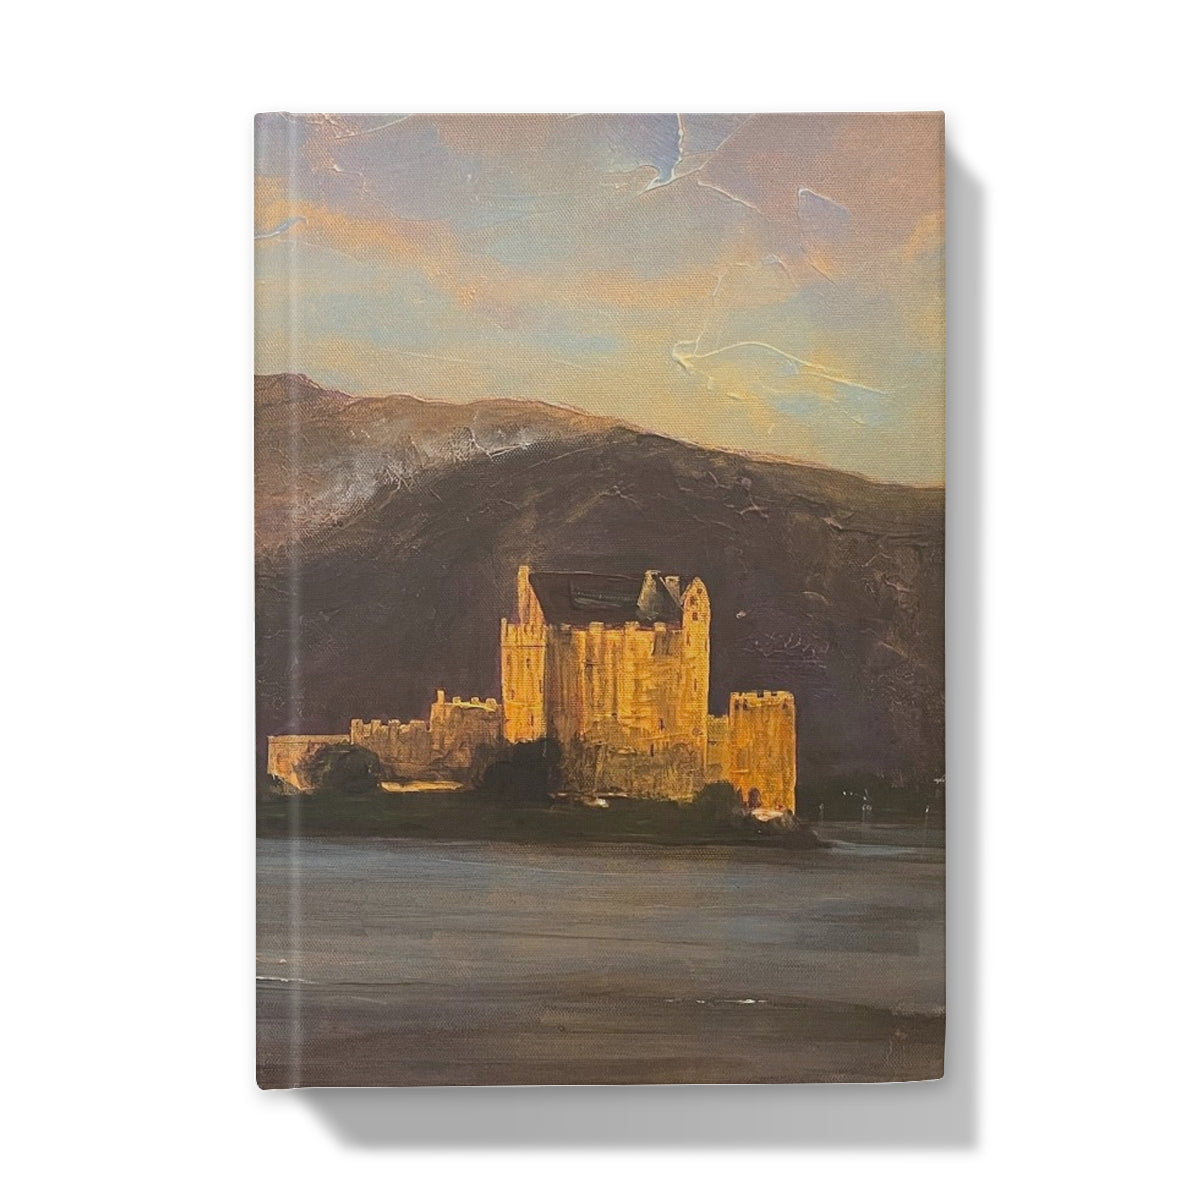 Eilean Donan Castle Art Gifts Hardback Journal-Journals & Notebooks-Historic & Iconic Scotland Art Gallery-A4-Plain-Paintings, Prints, Homeware, Art Gifts From Scotland By Scottish Artist Kevin Hunter